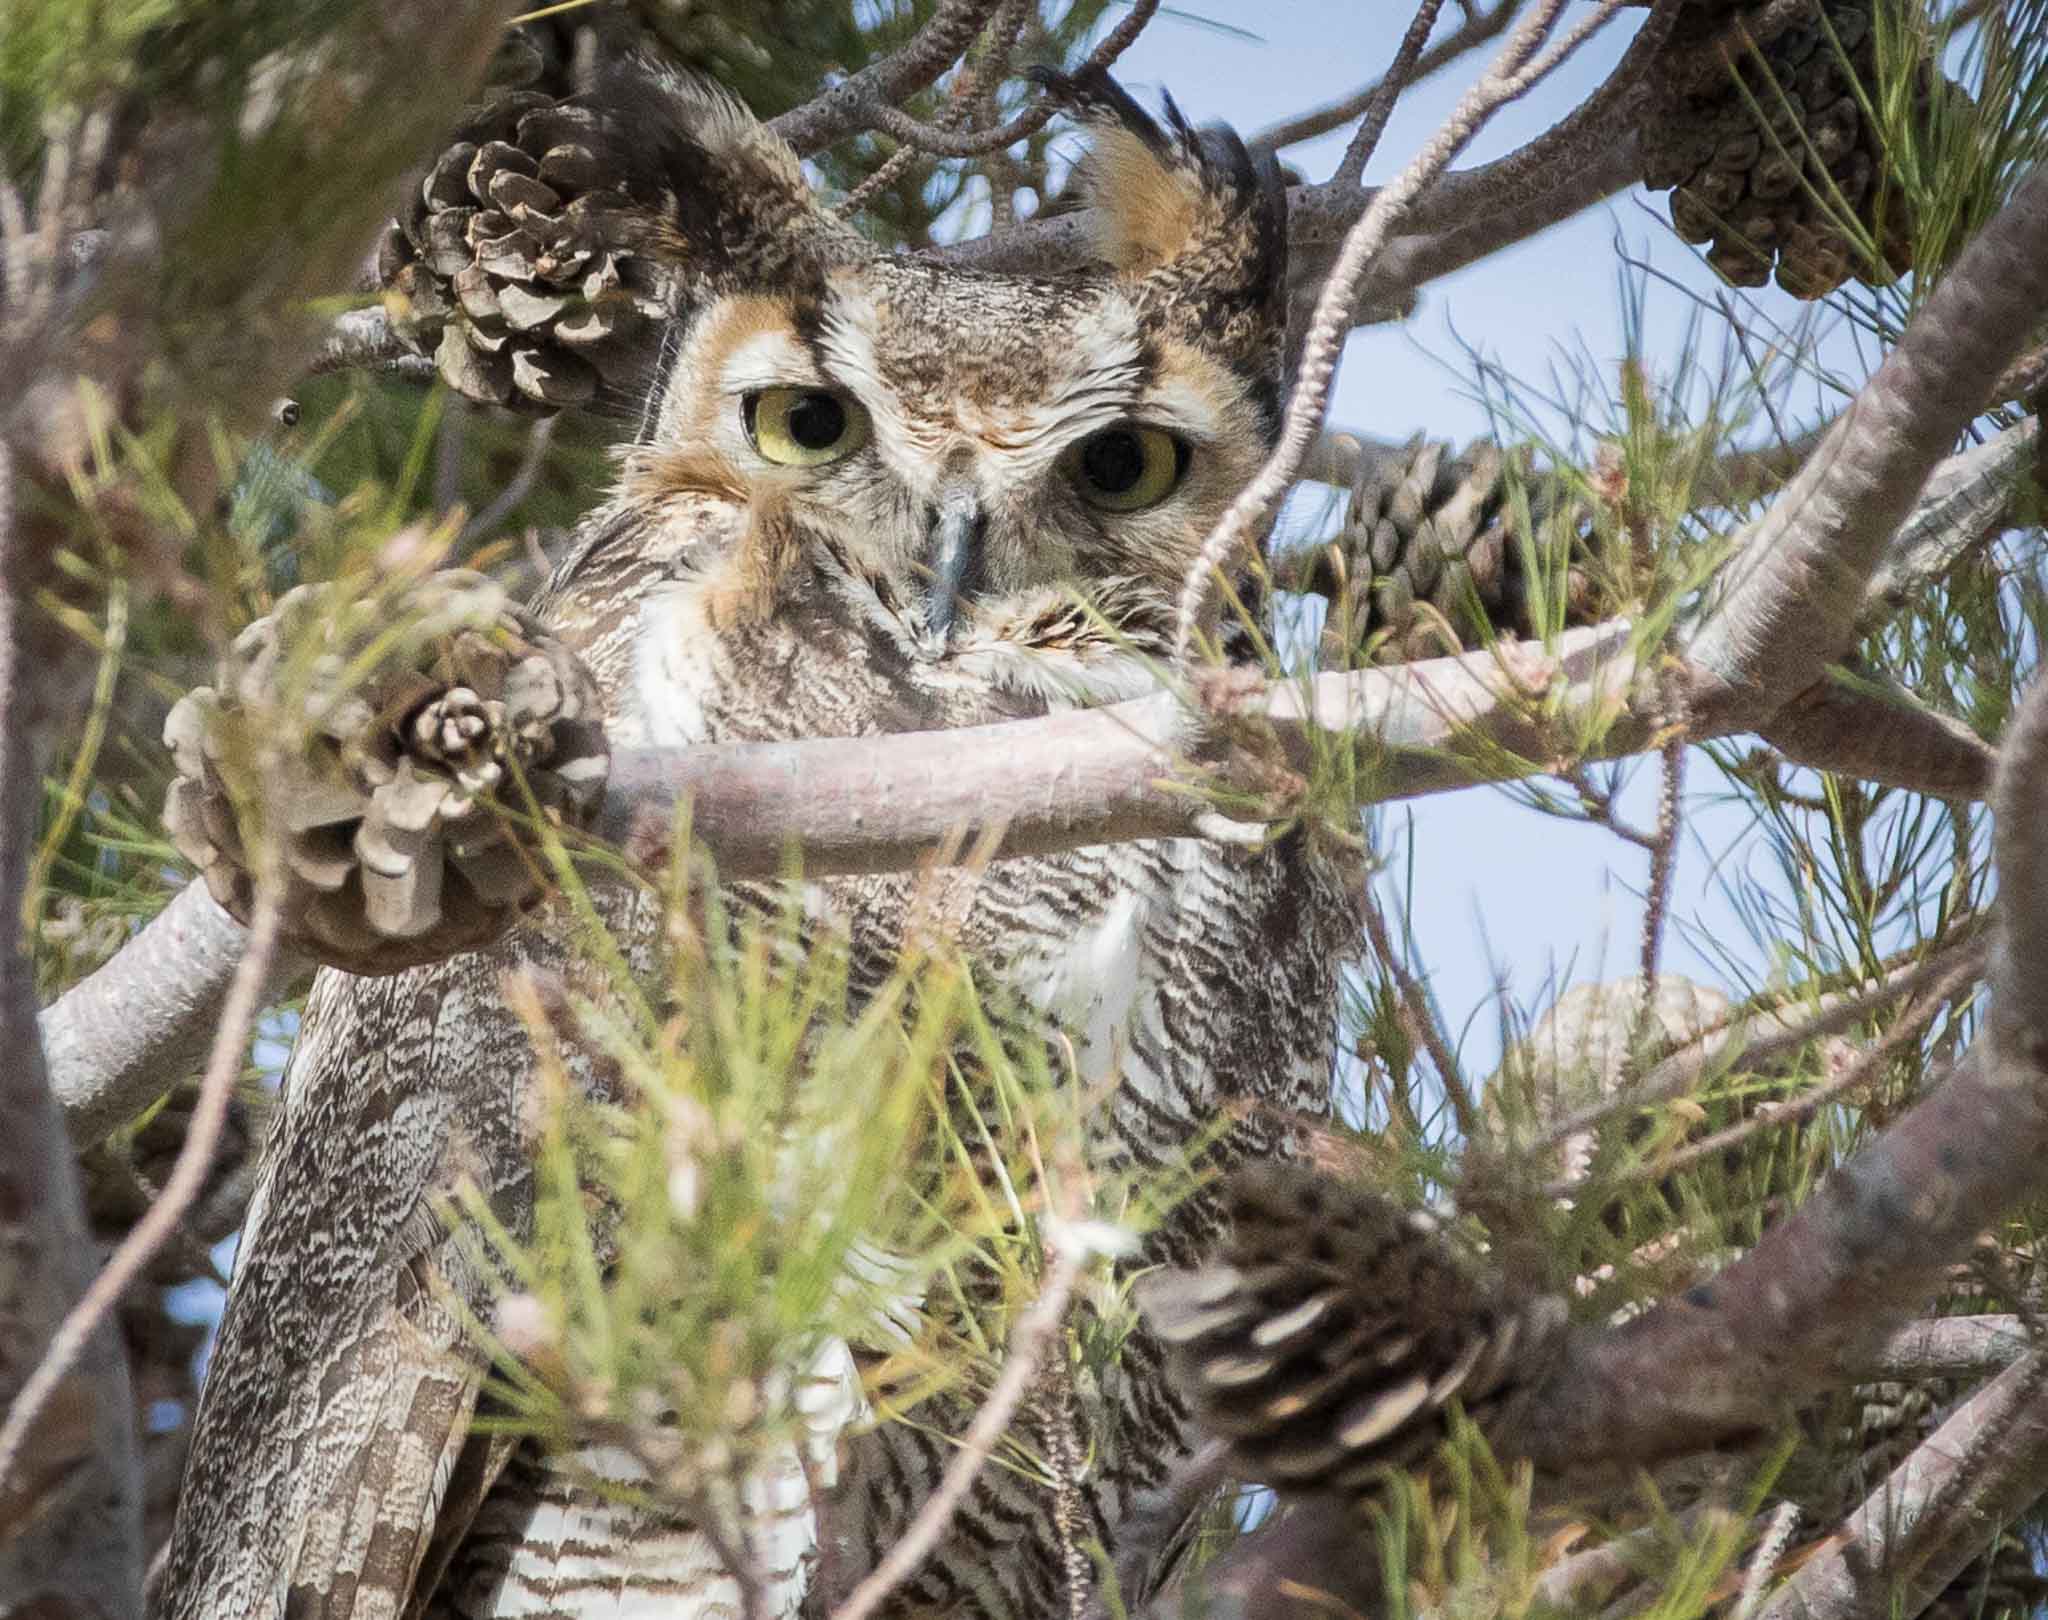 Great Horned Owl roosting in a pine, Pancho Villa State Park, Columbus NM, February 23, 2015